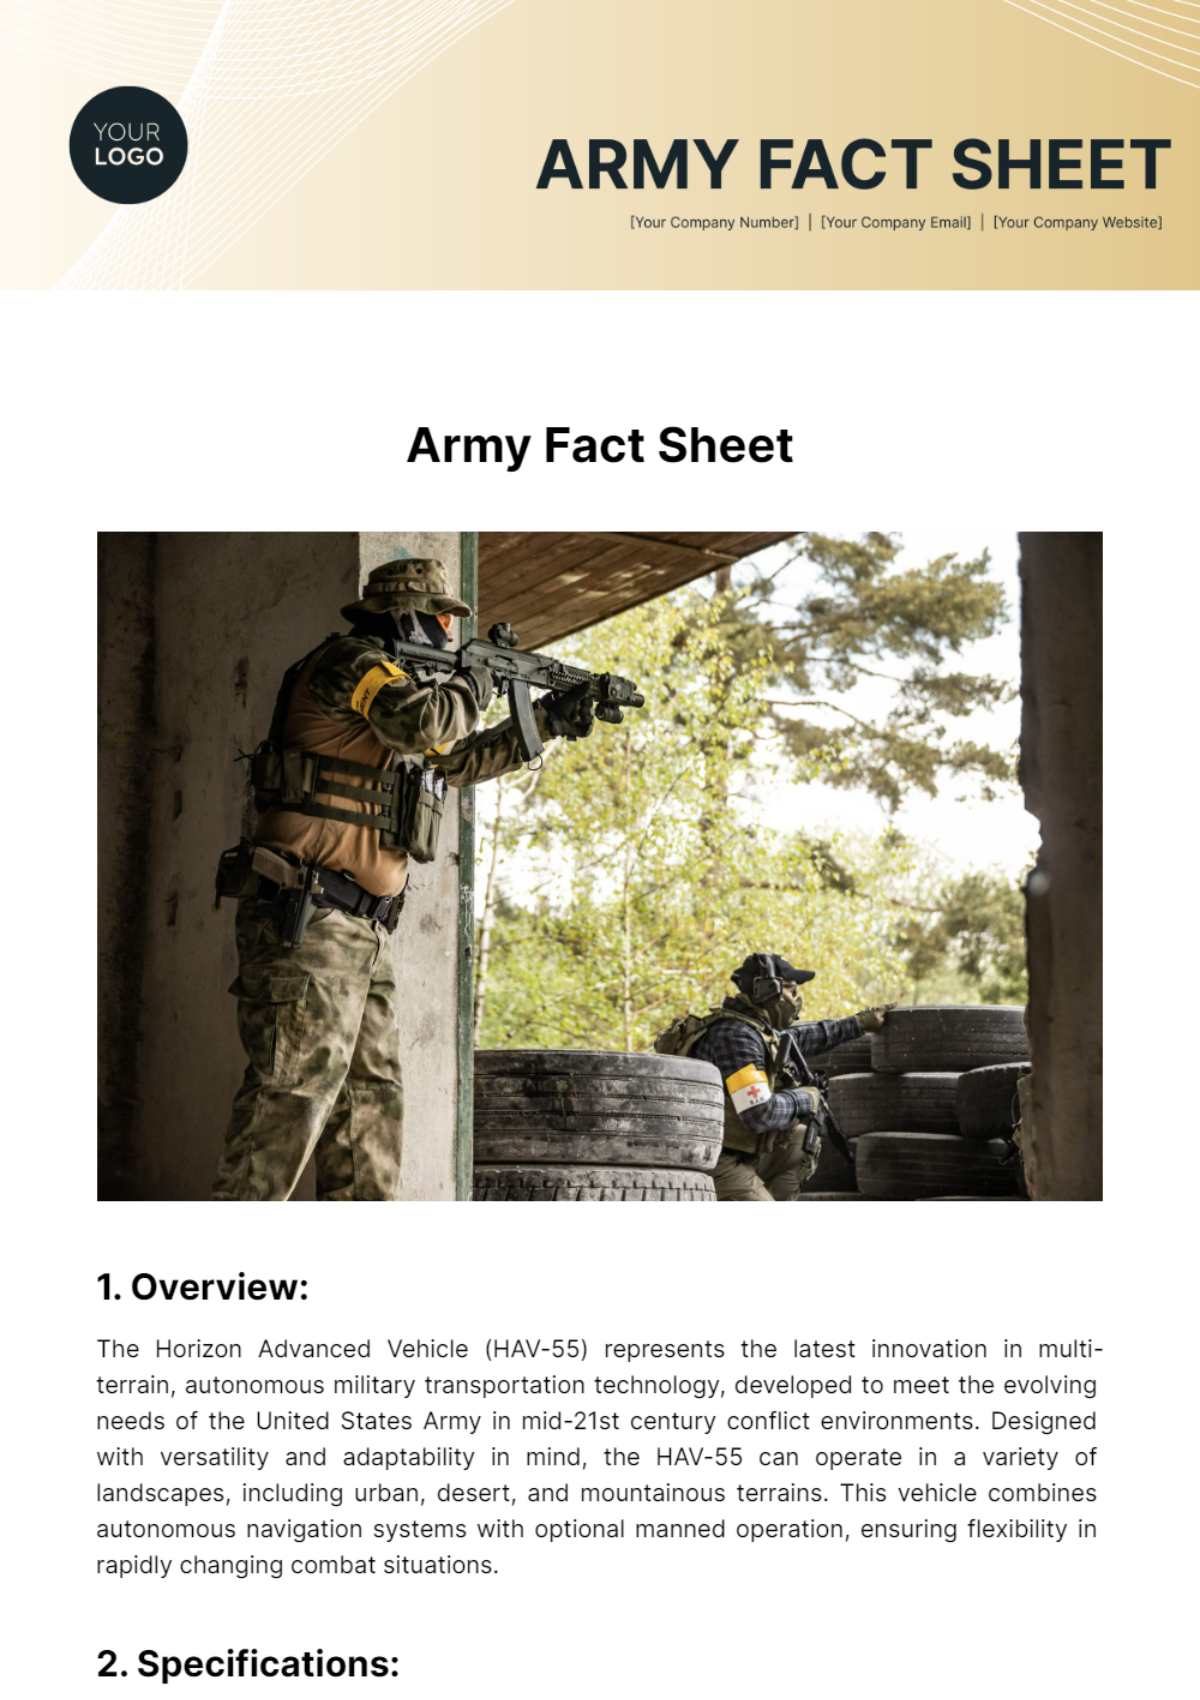 Army Fact Sheet Template